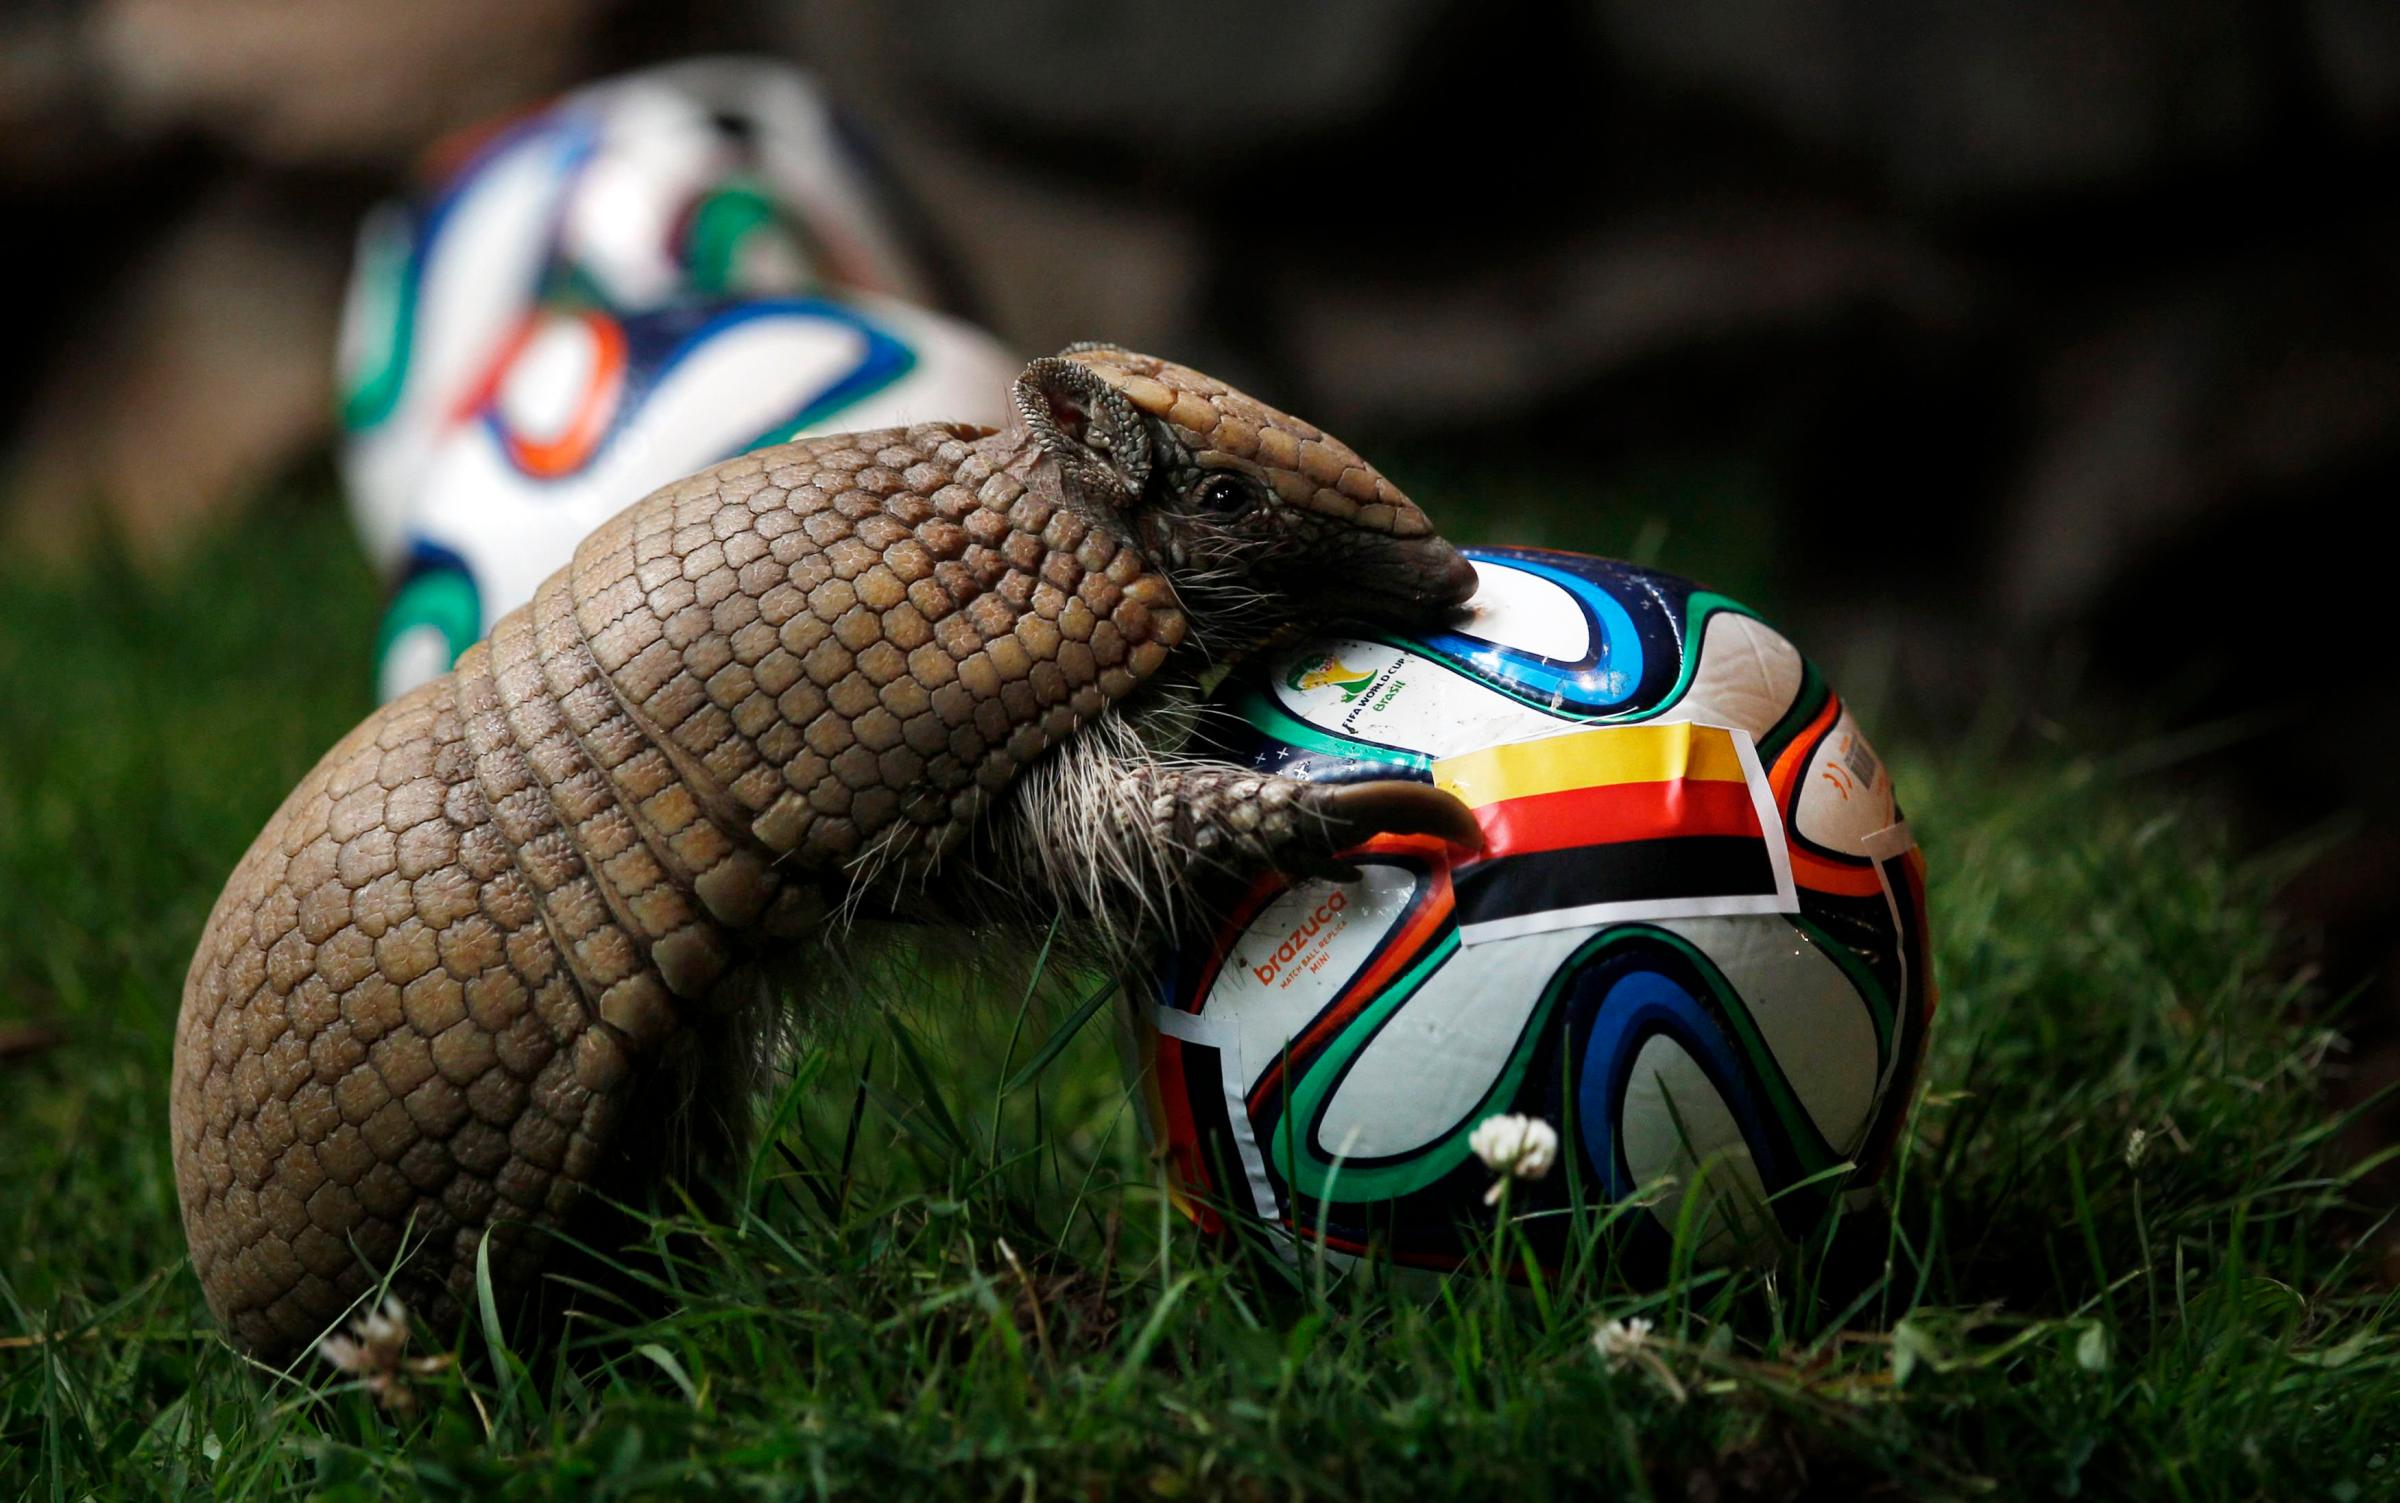 This armadillo named Norman, Germany's World Cup oracle, approaches the soccer ball representing Germany as he makes his prediction for the team's opening World Cup match against Portugal on June 16, at the zoo in Muenster, Germany on June 13, 2014.